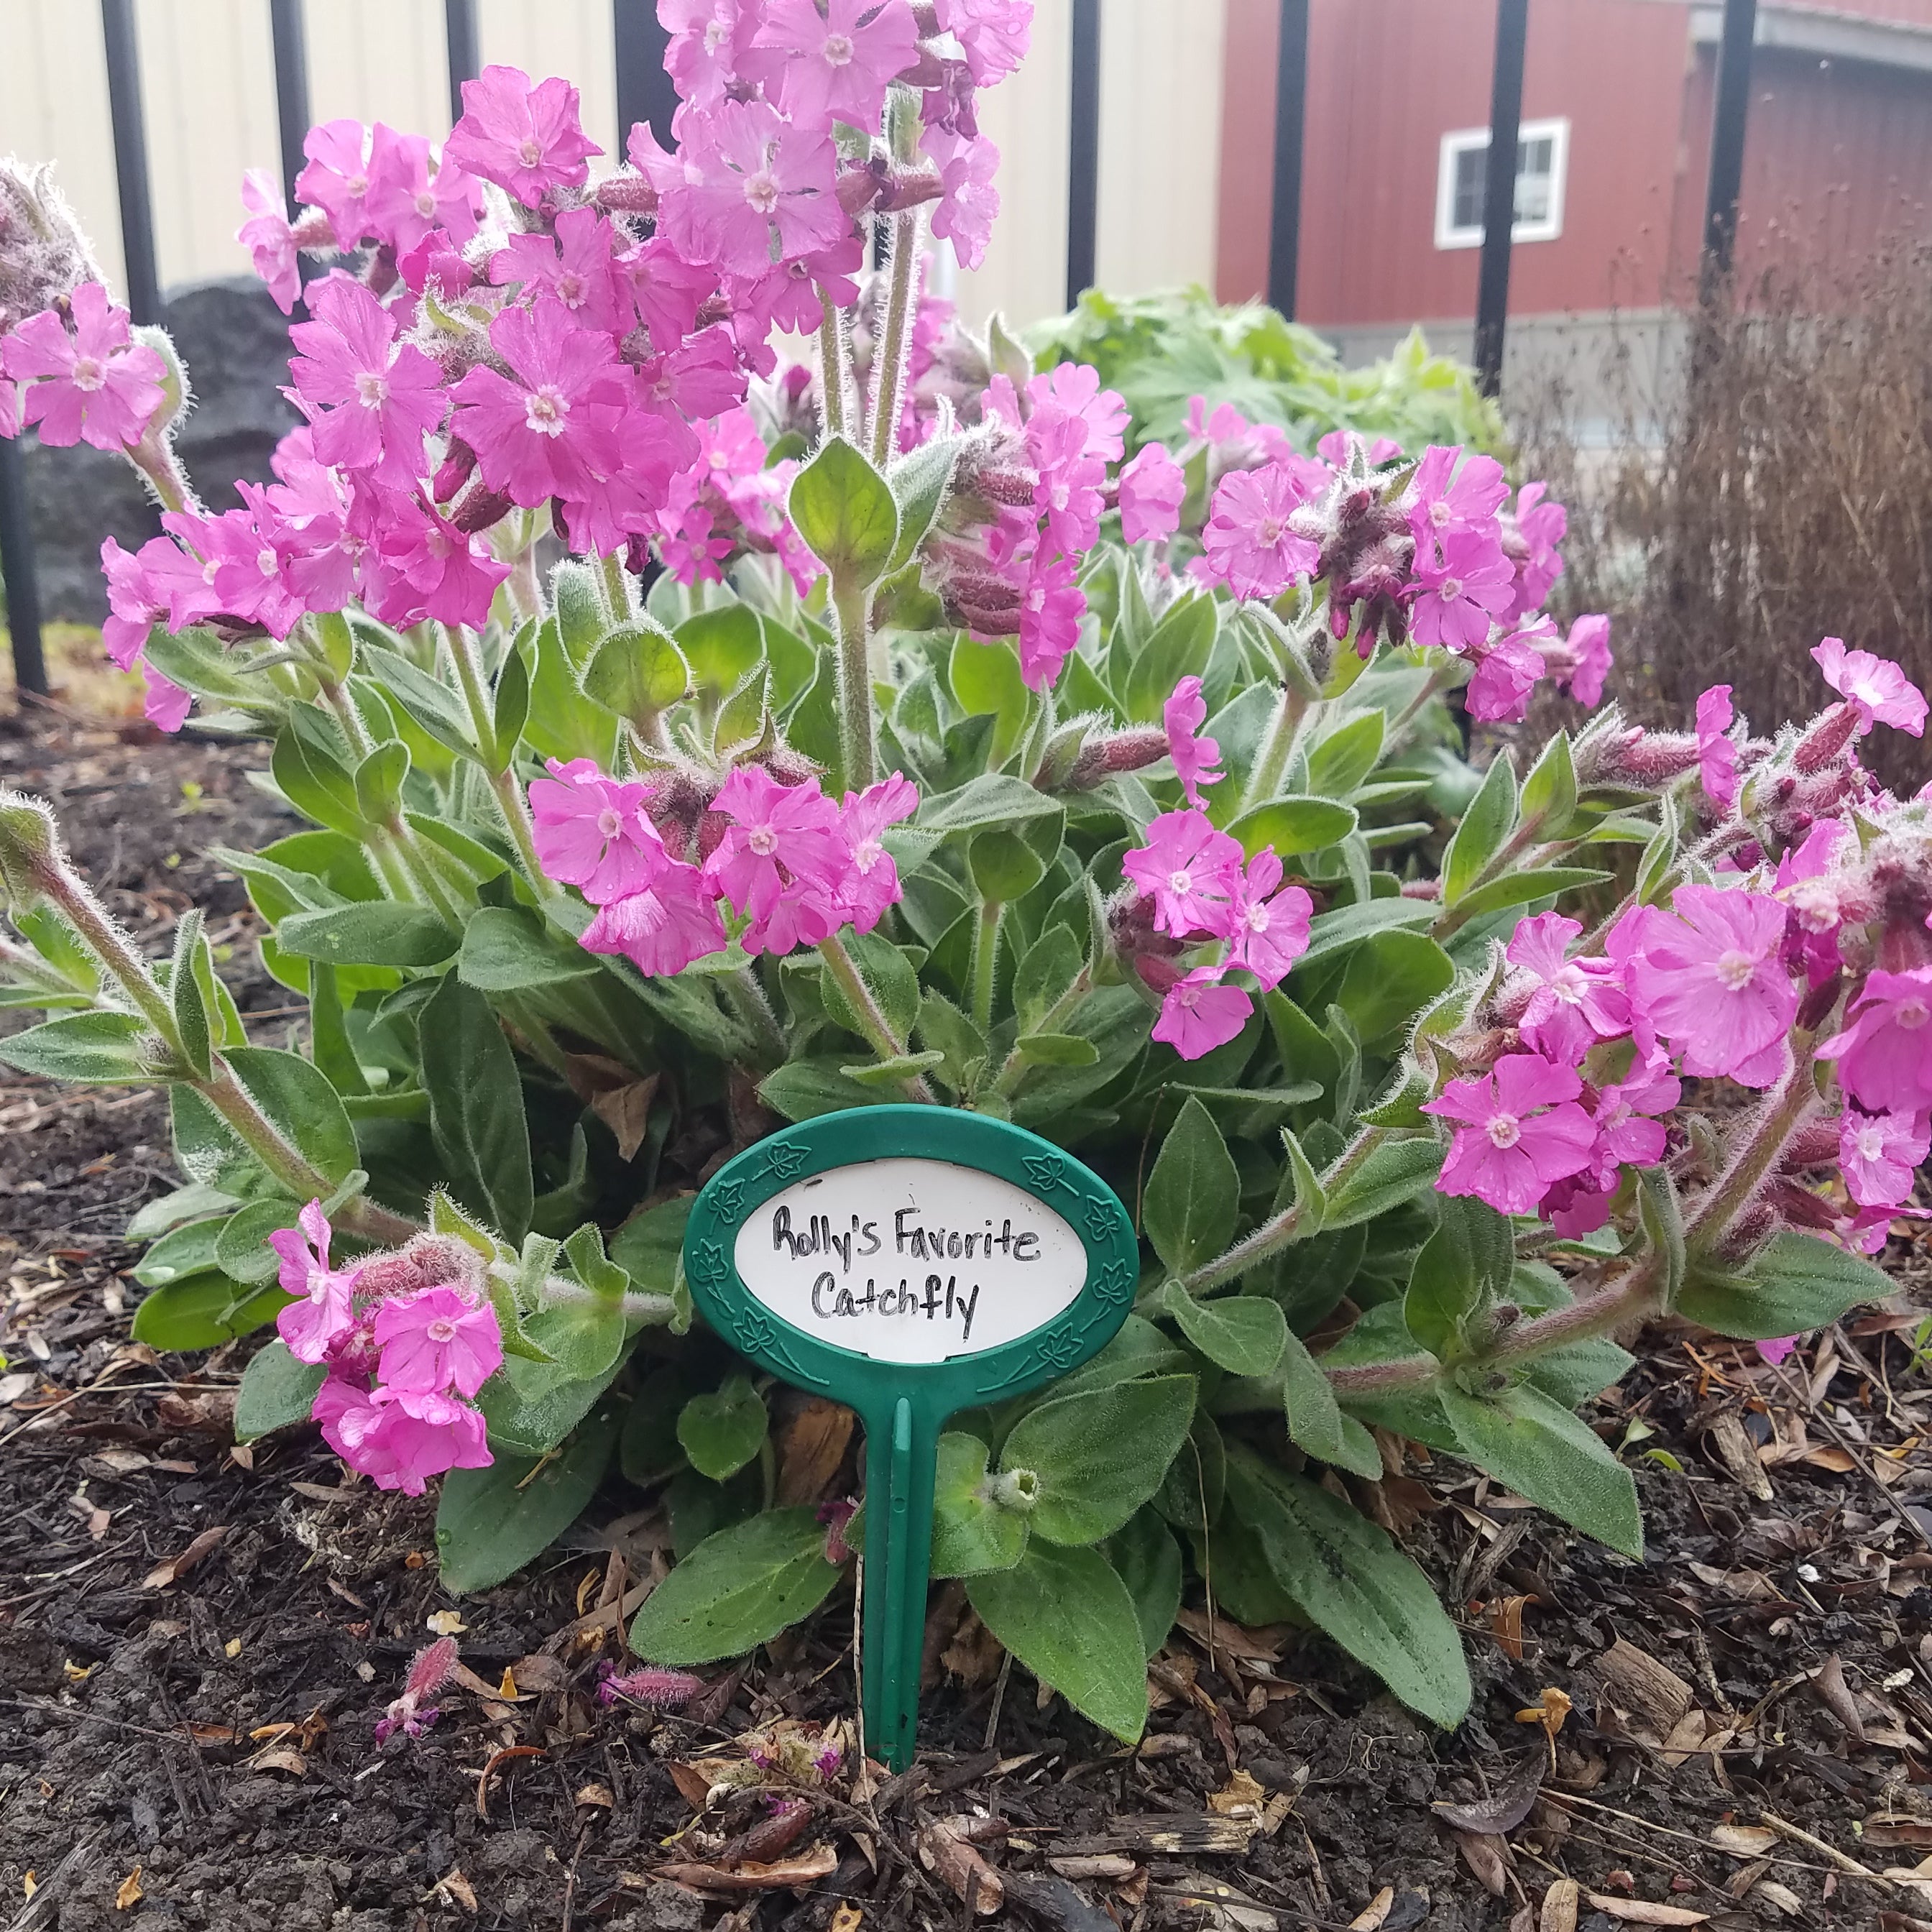 Plant markers in front of Rolly's Favorite Catchfly plant in bloom